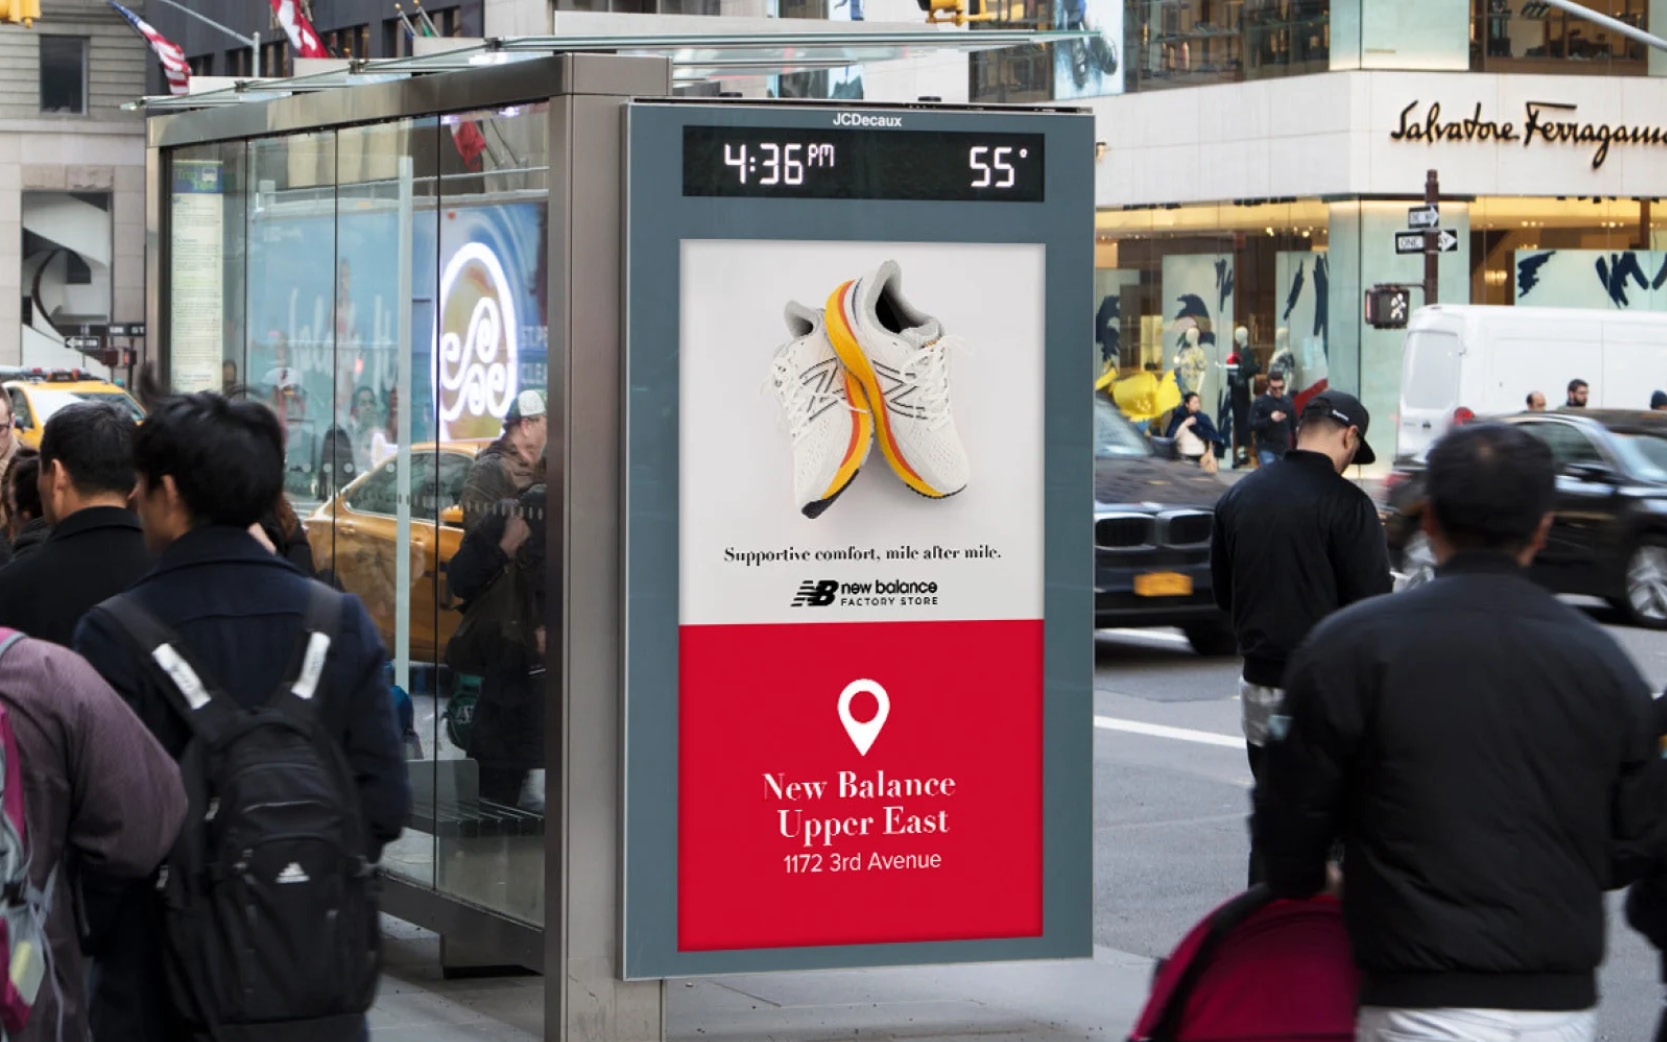 DOOH retail advertisement using real-time data to point consumers to stores